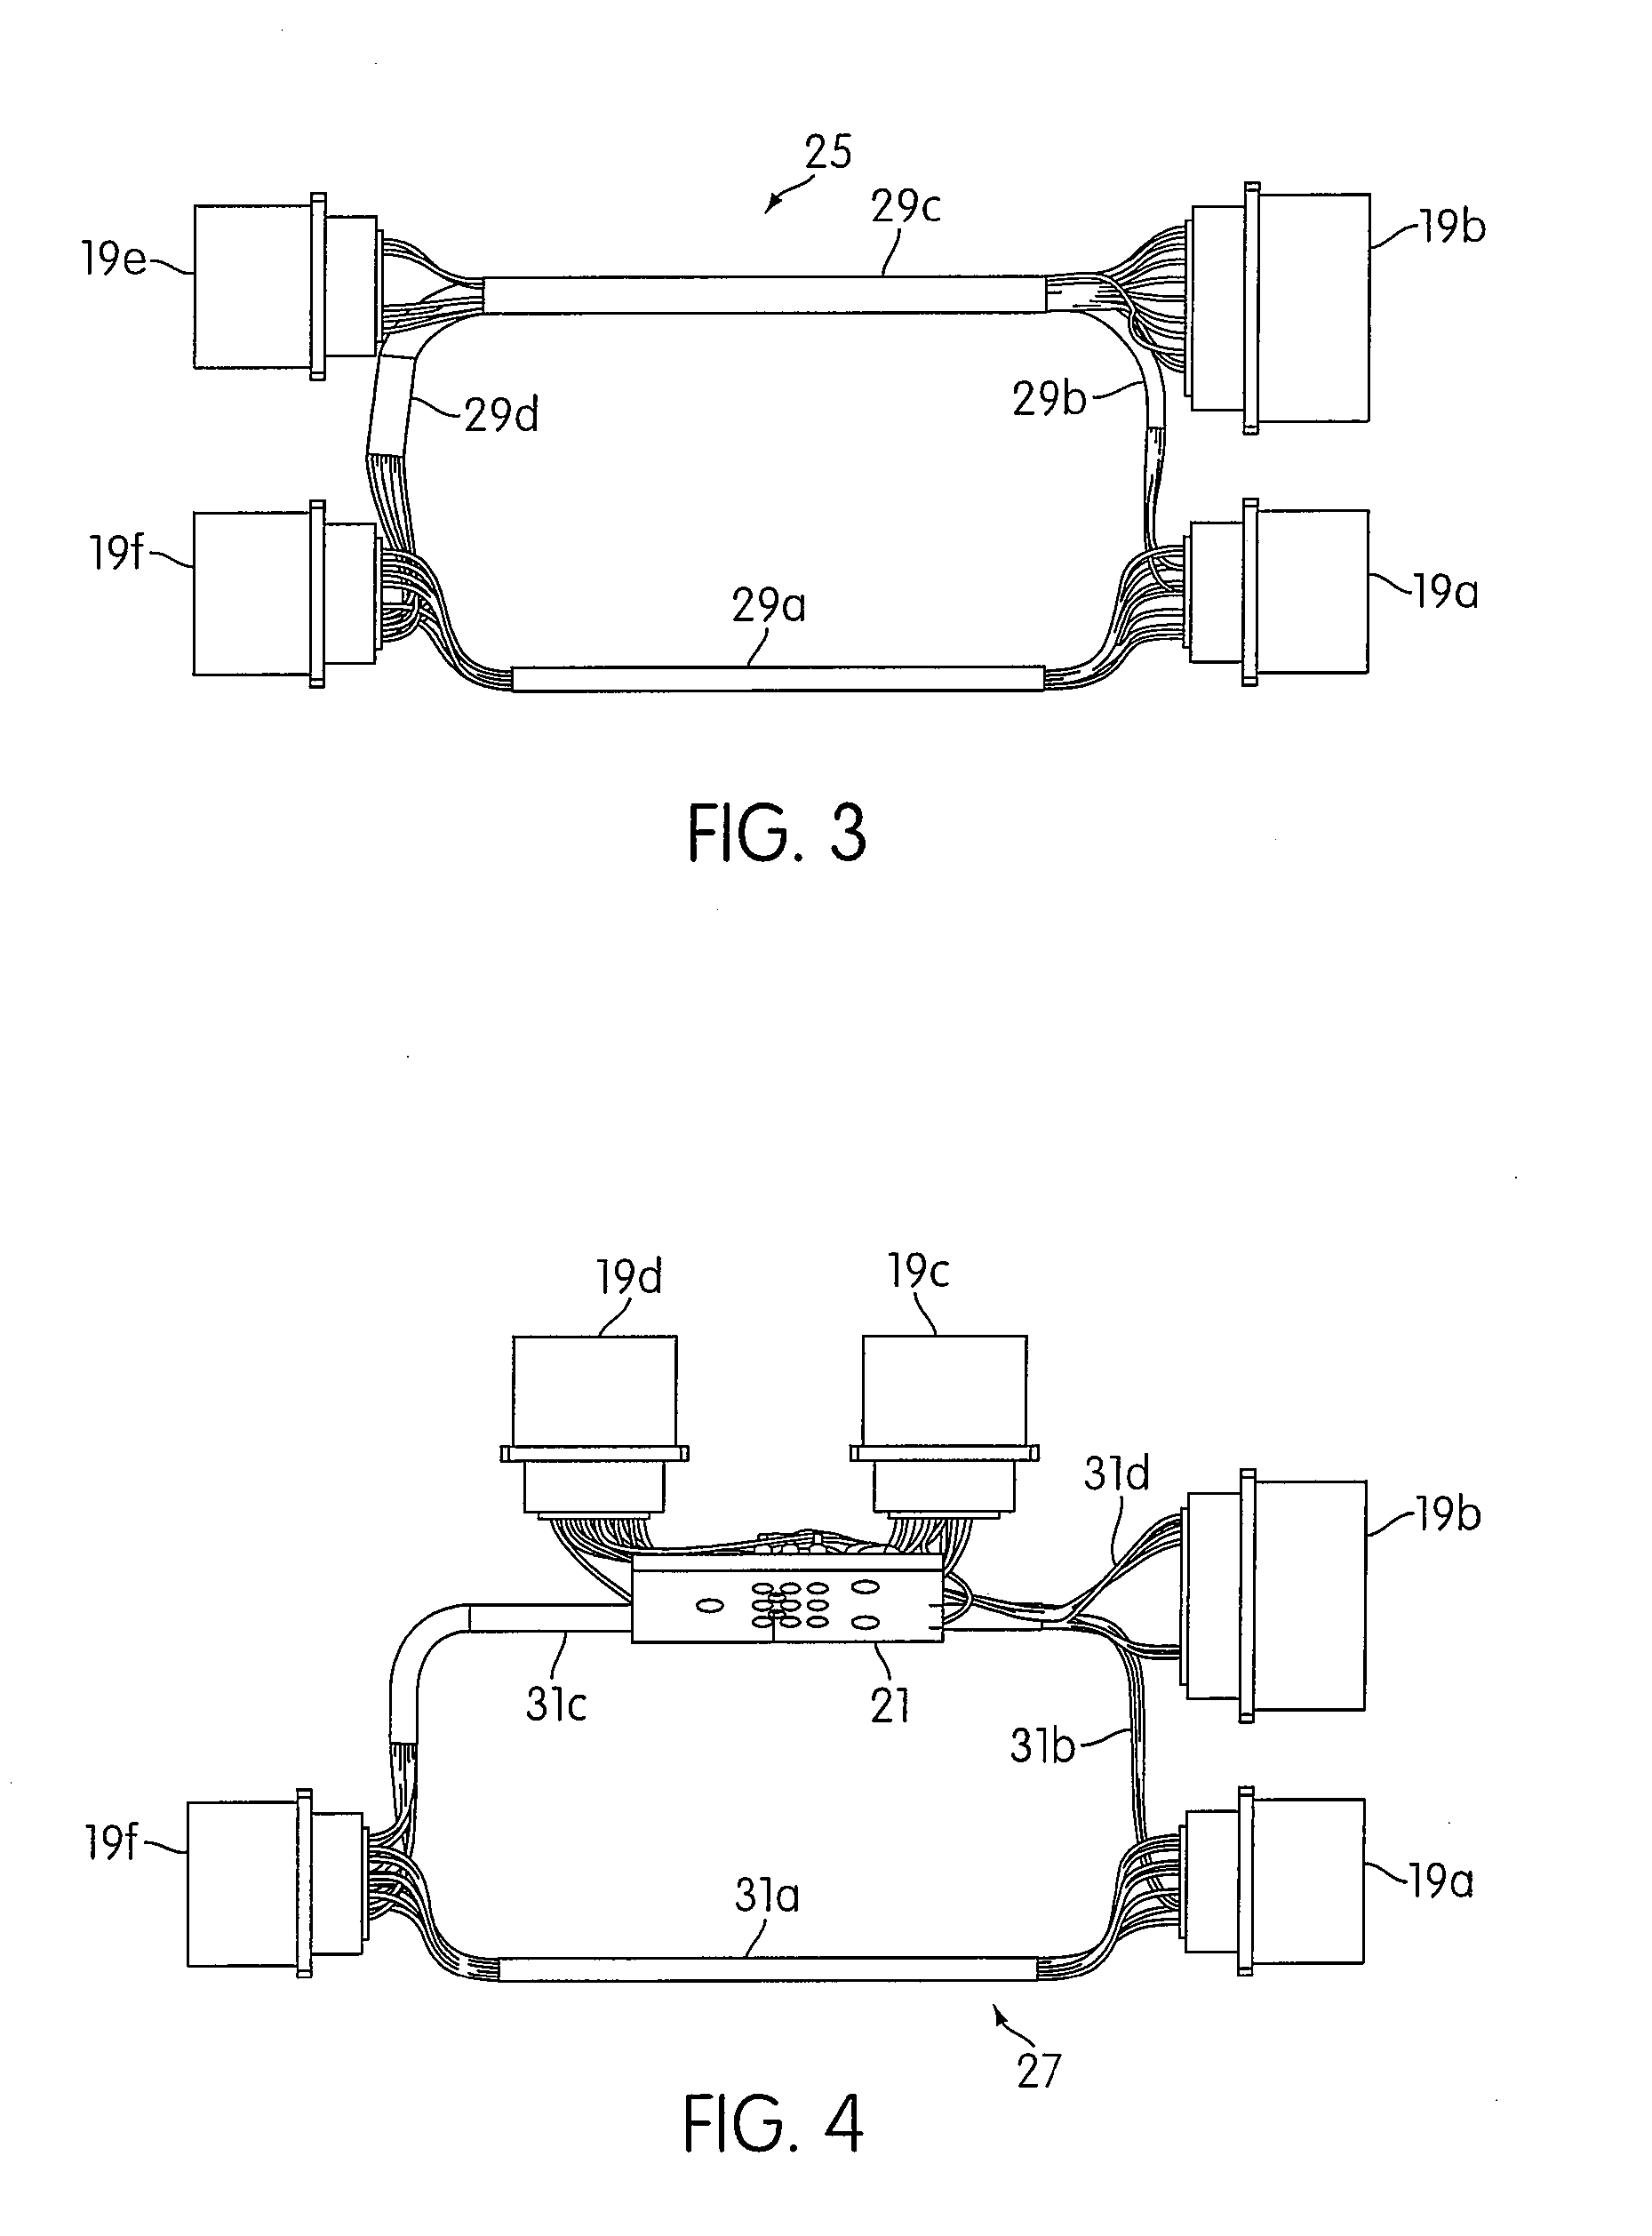 Molded electronic assembly